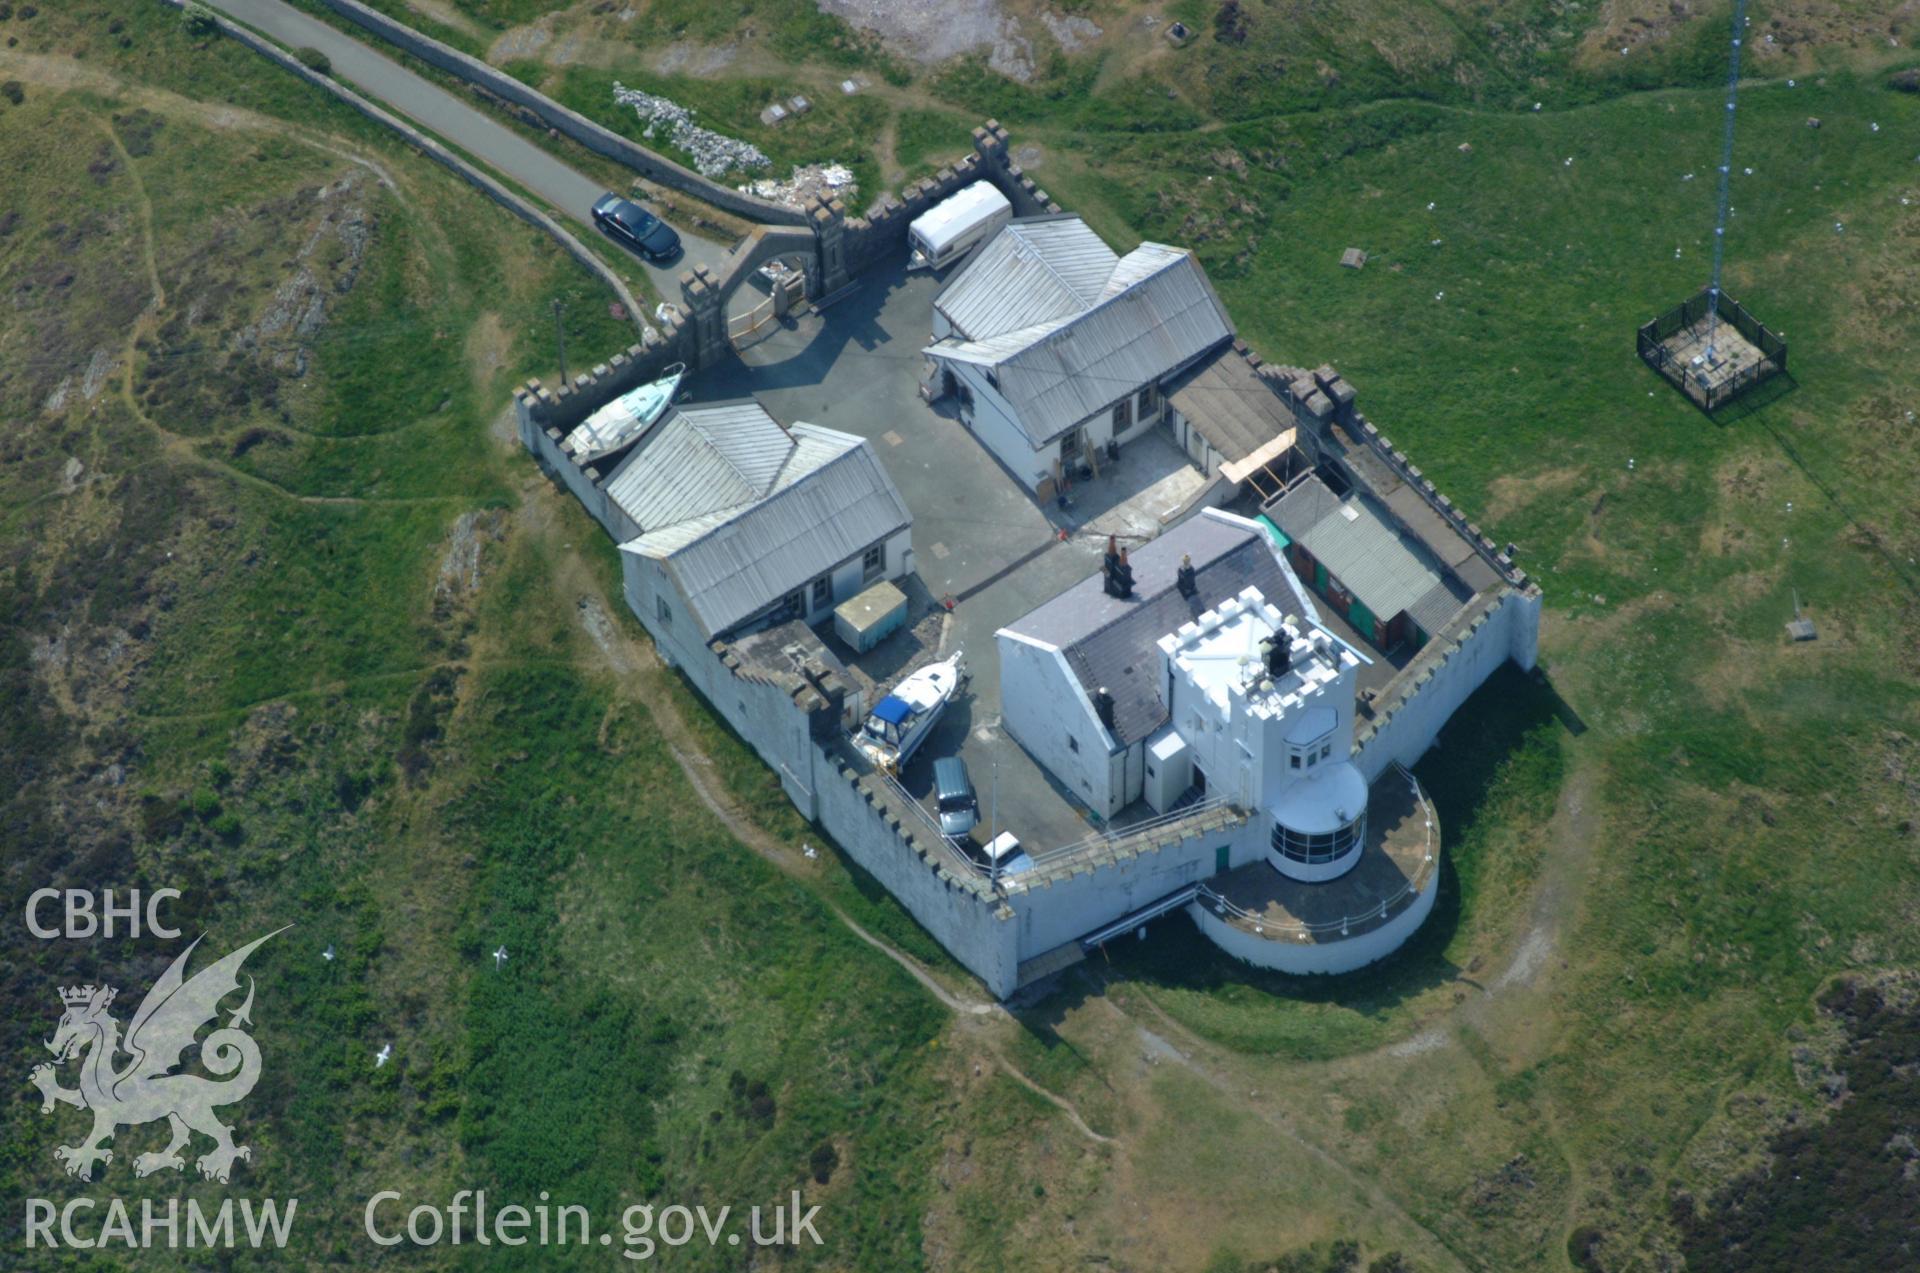 RCAHMW colour oblique aerial photograph of Elianus Point Lighthouse, Llaneilian taken on 26/05/2004 by Toby Driver